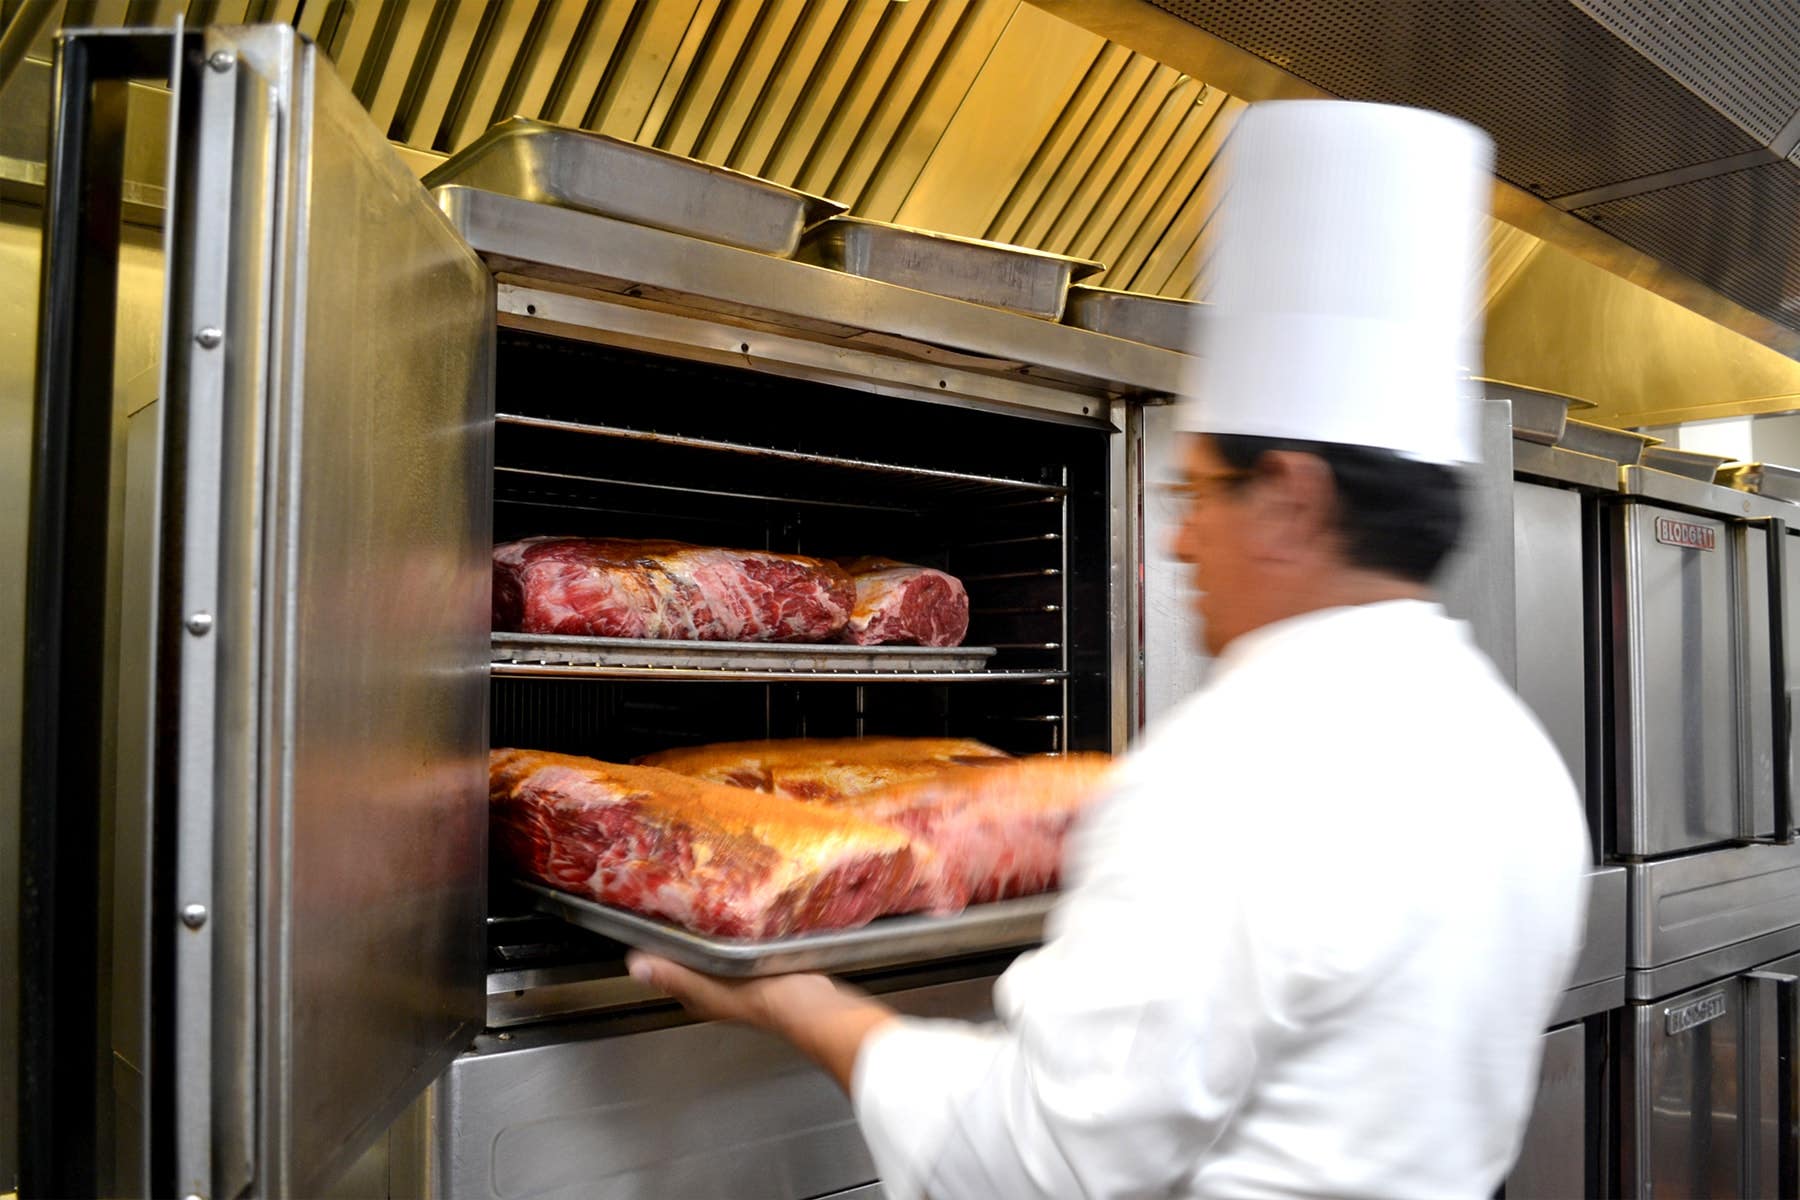 A chef loads prime rib into an oven at Lawry's The Prime Rib